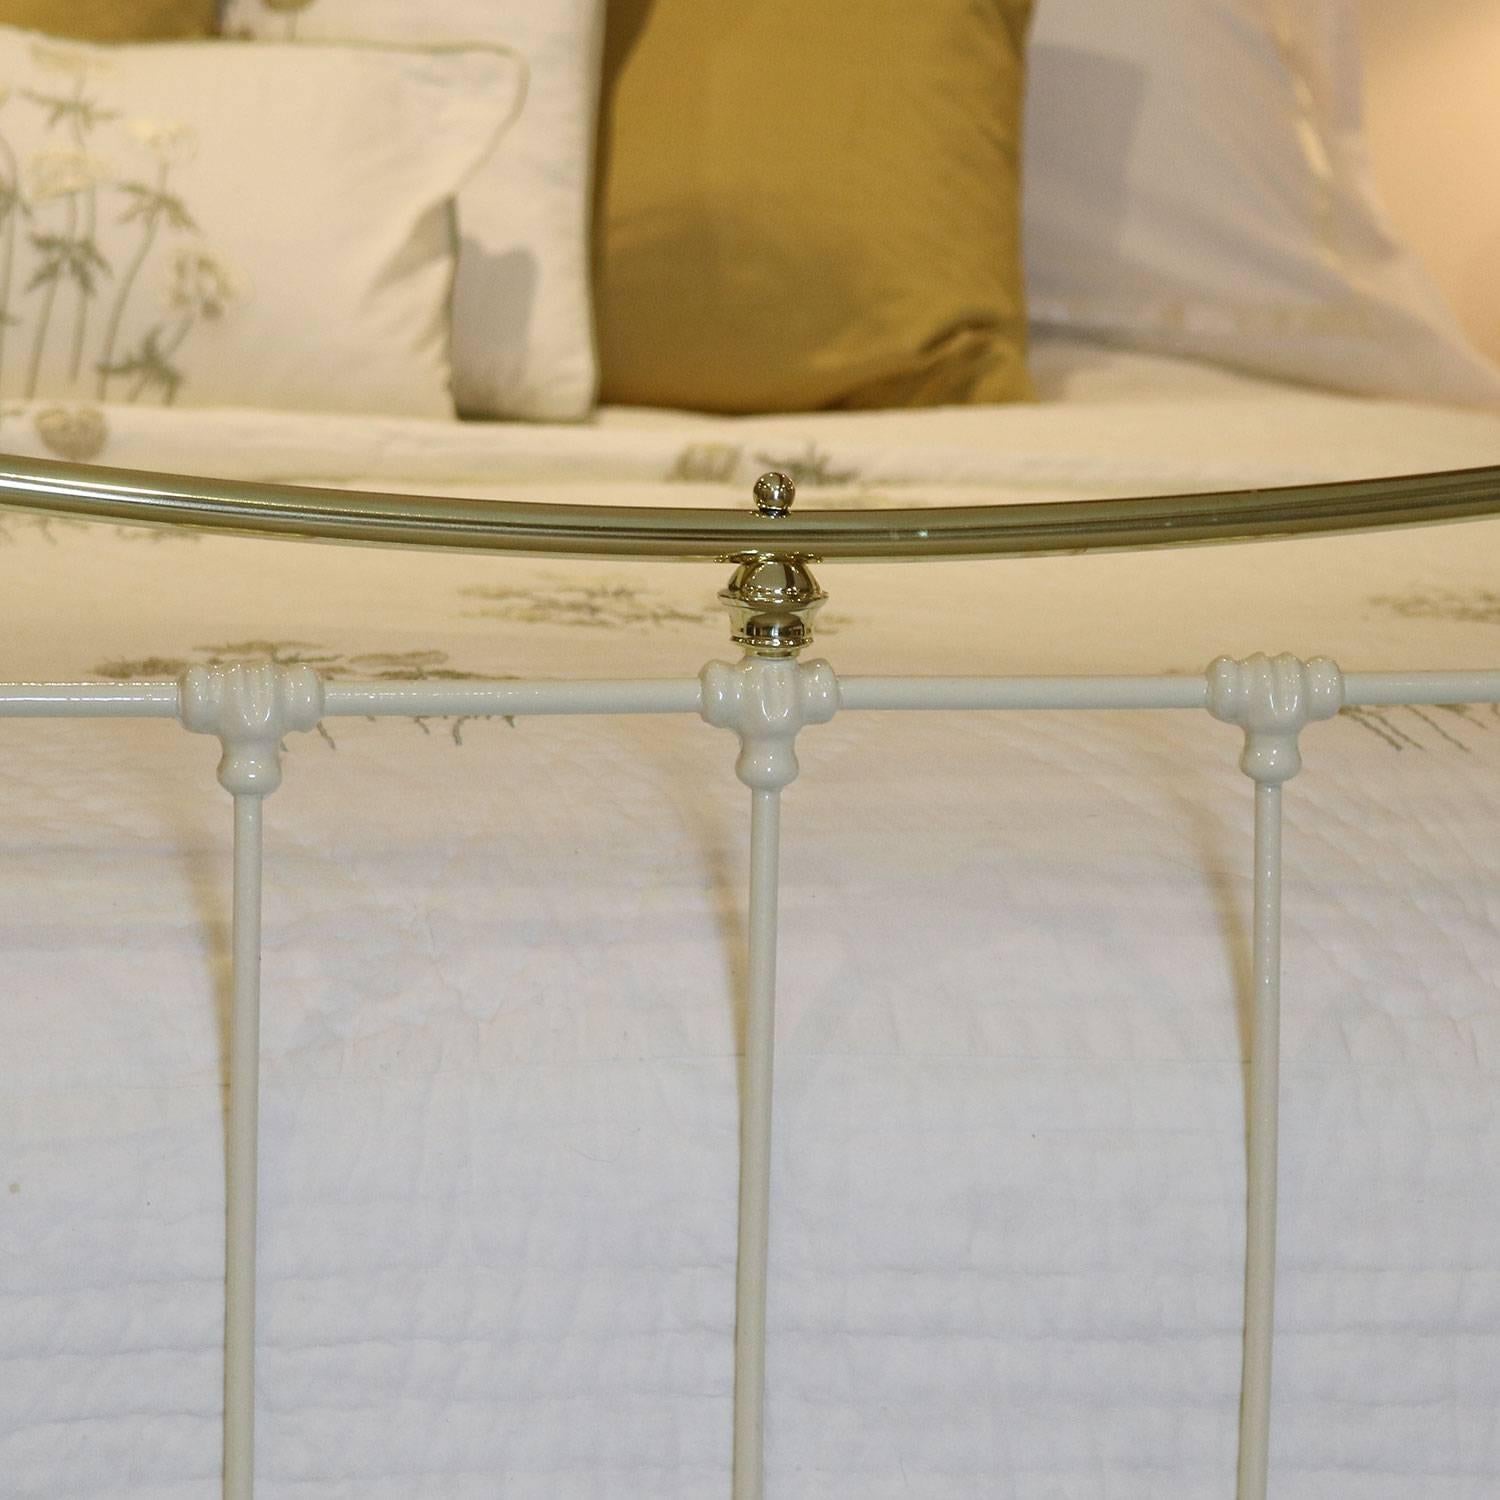 English Brass and Iron Bed in Cream, MK94